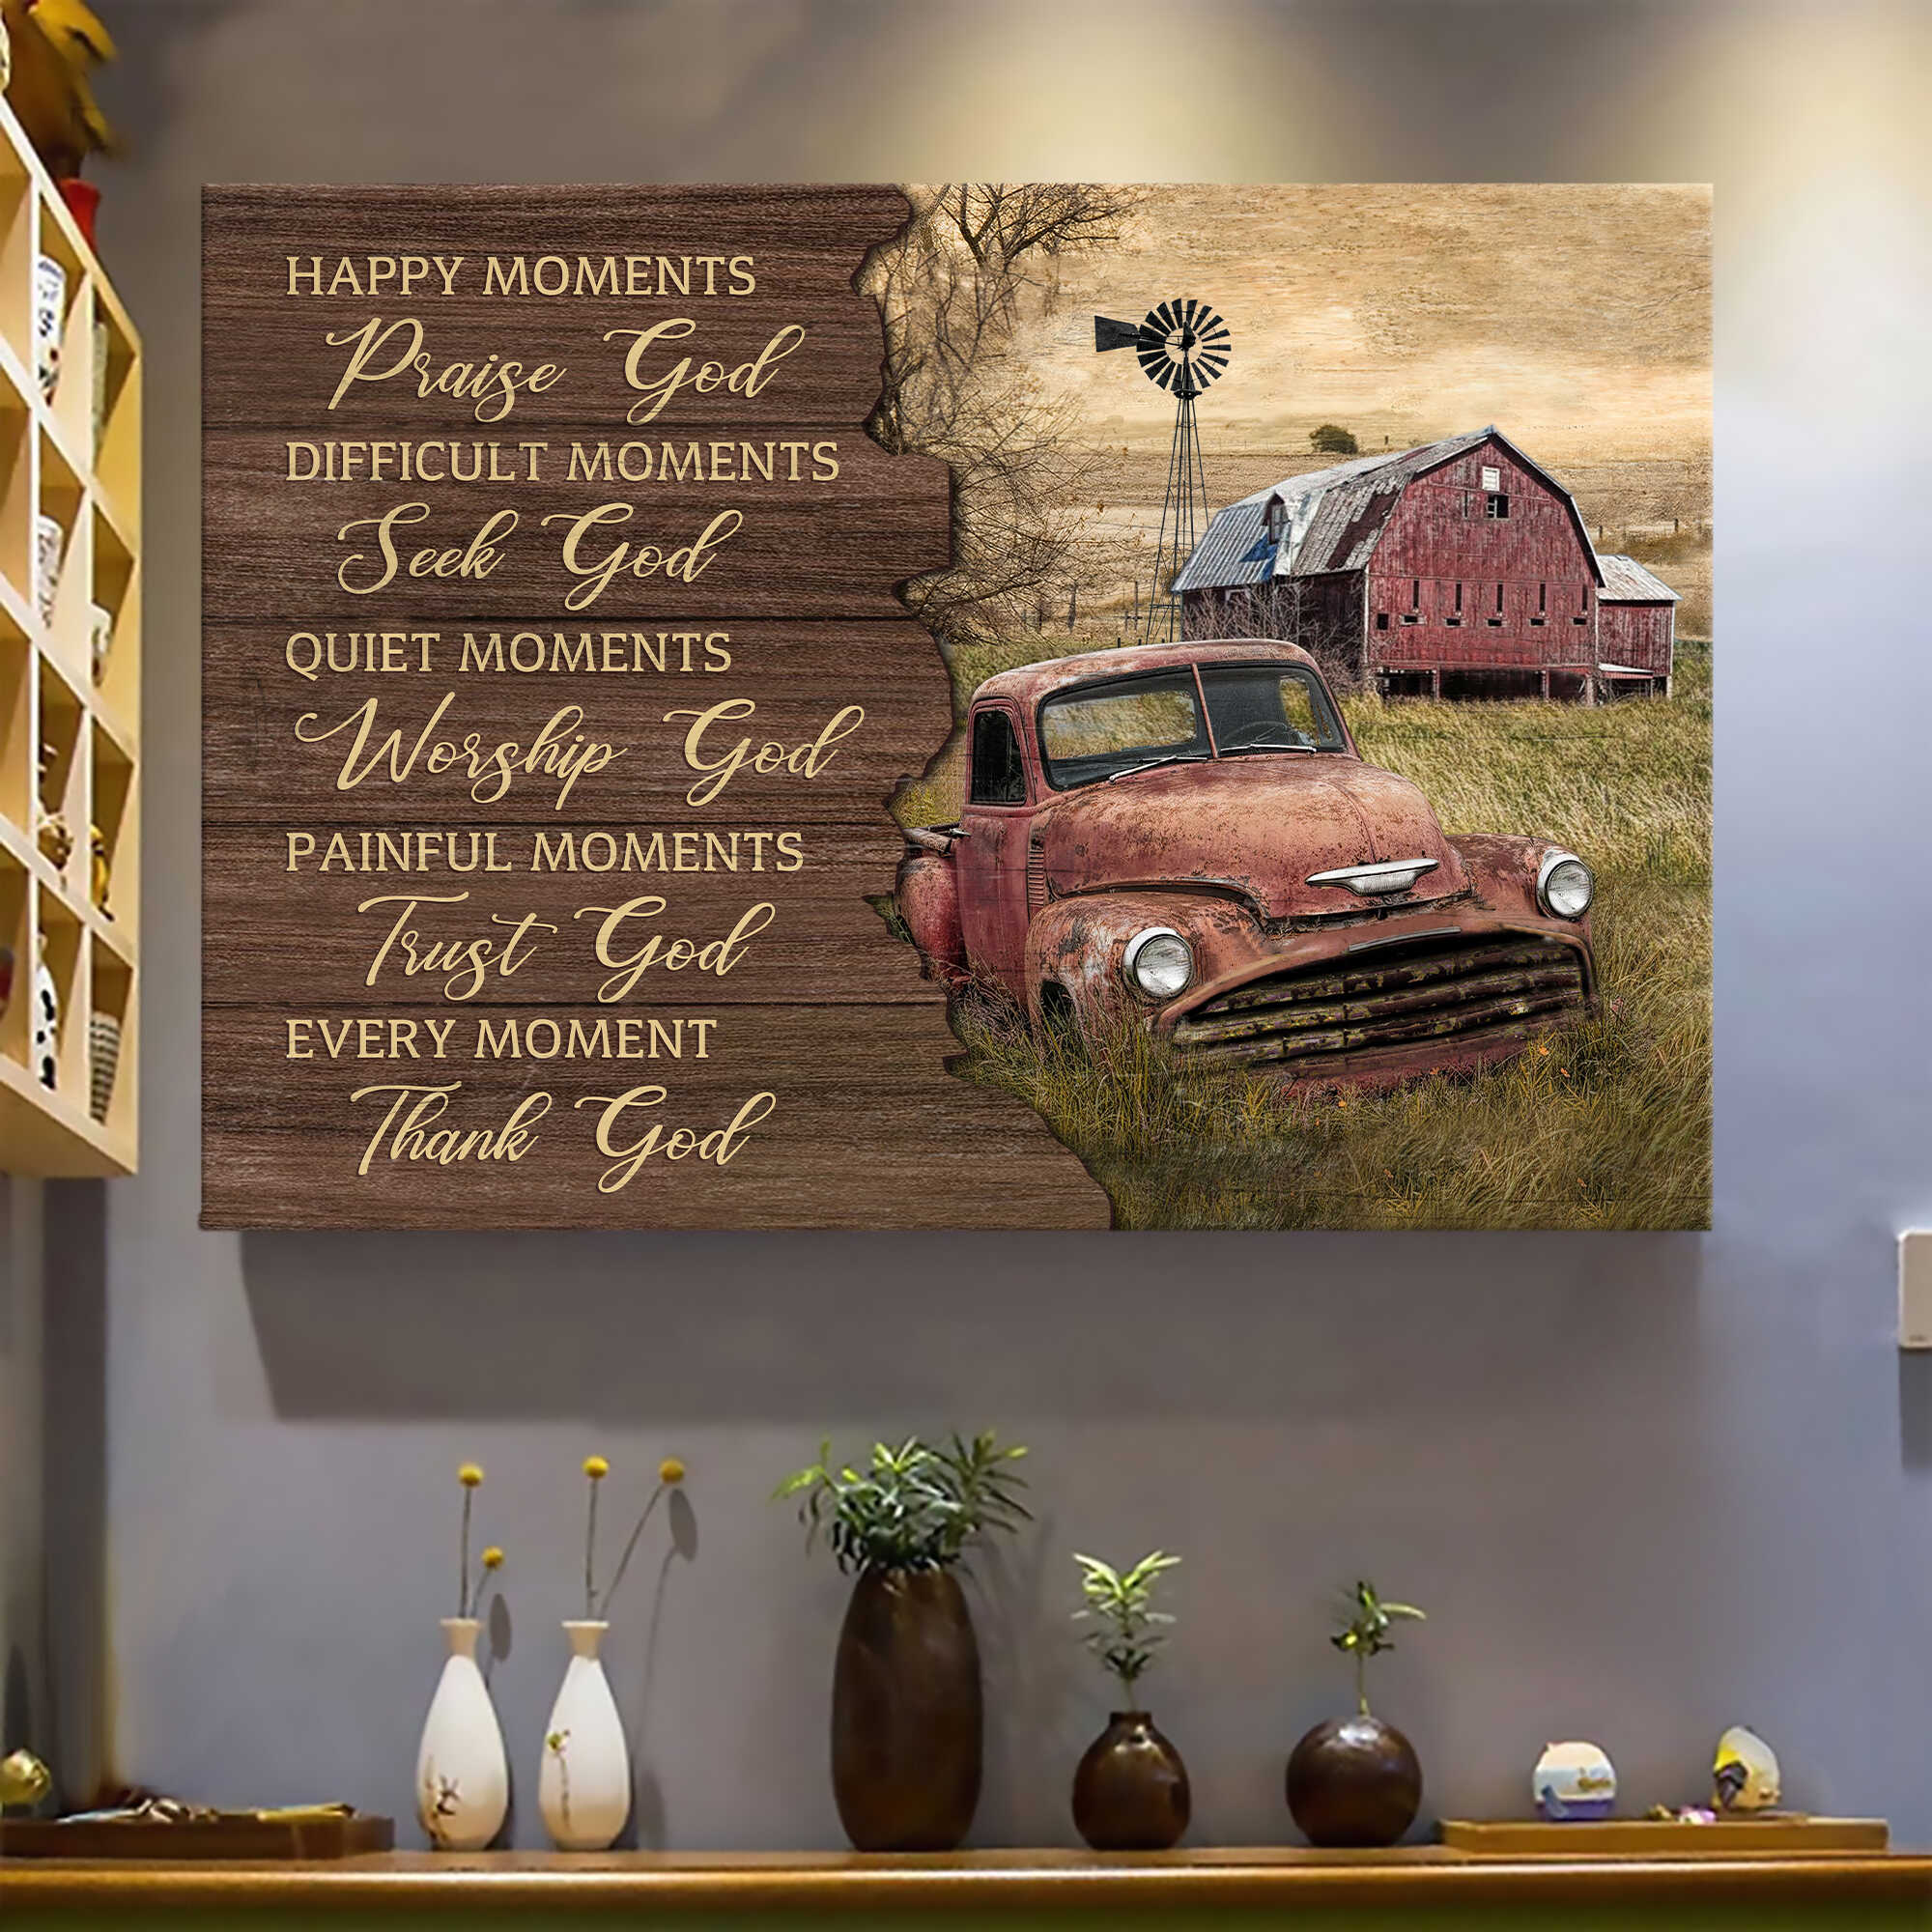 Old Car, Barn Painting, Every moment, thank God - Jesus Landscape Canvas Prints, Wall Art